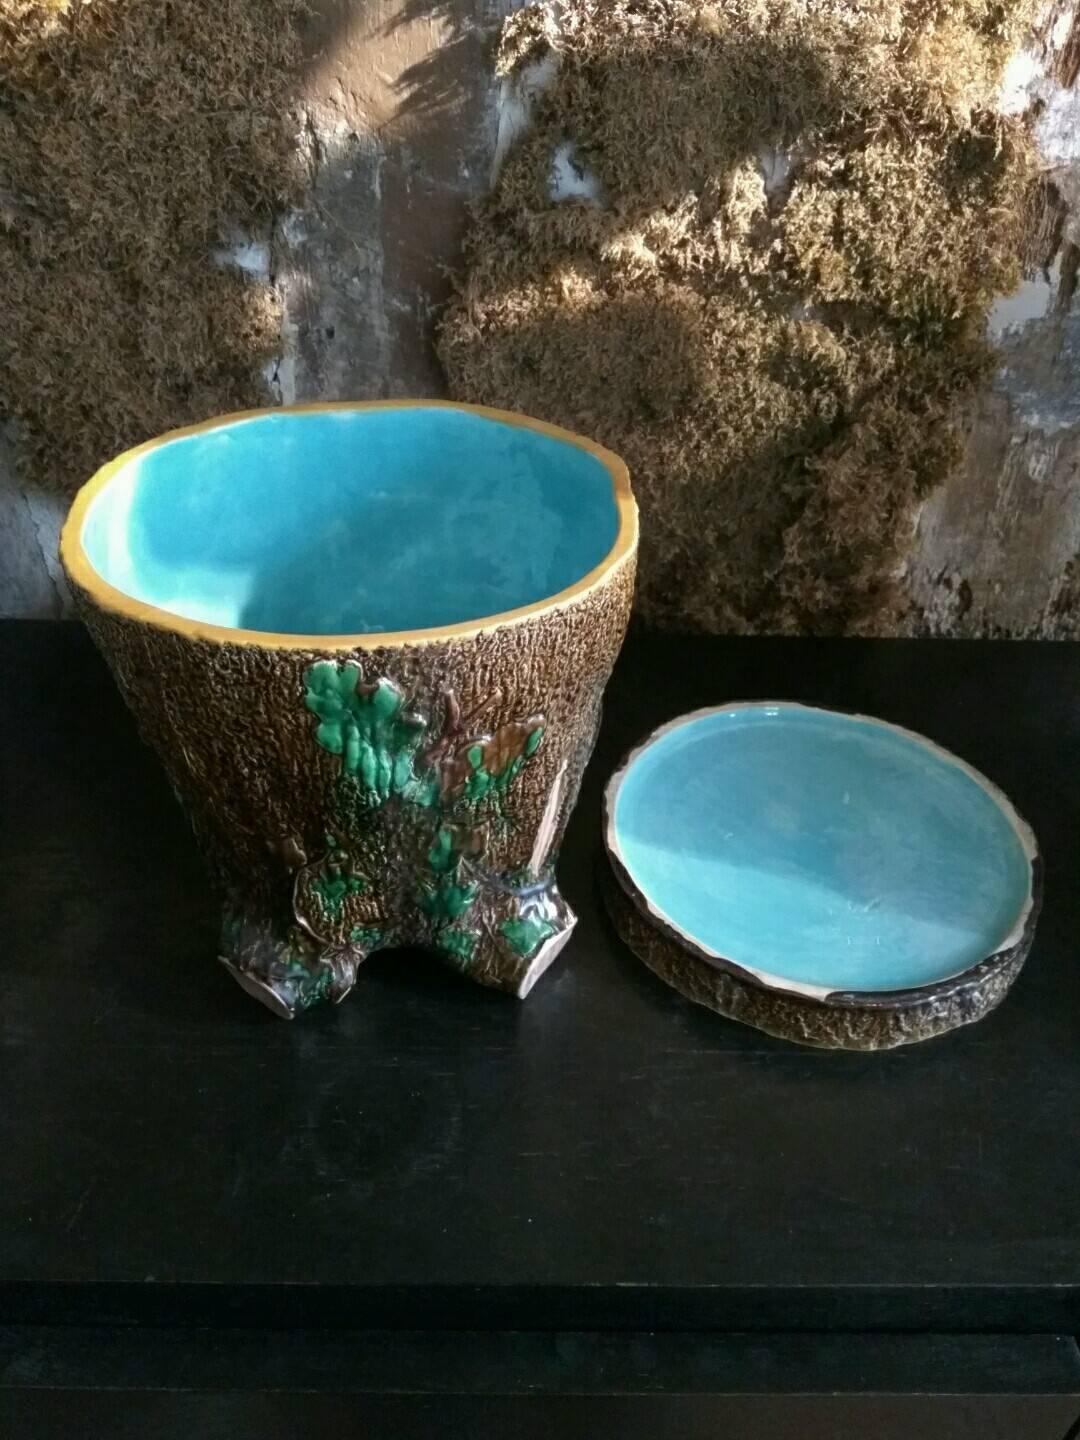 This planter imitates a tree stump. Its centre is enameled with a luminous blue which is a characteristic of the English manufacture. This color serves as a signature and brings a very decorative touch to the piece The subject of the tree stump was